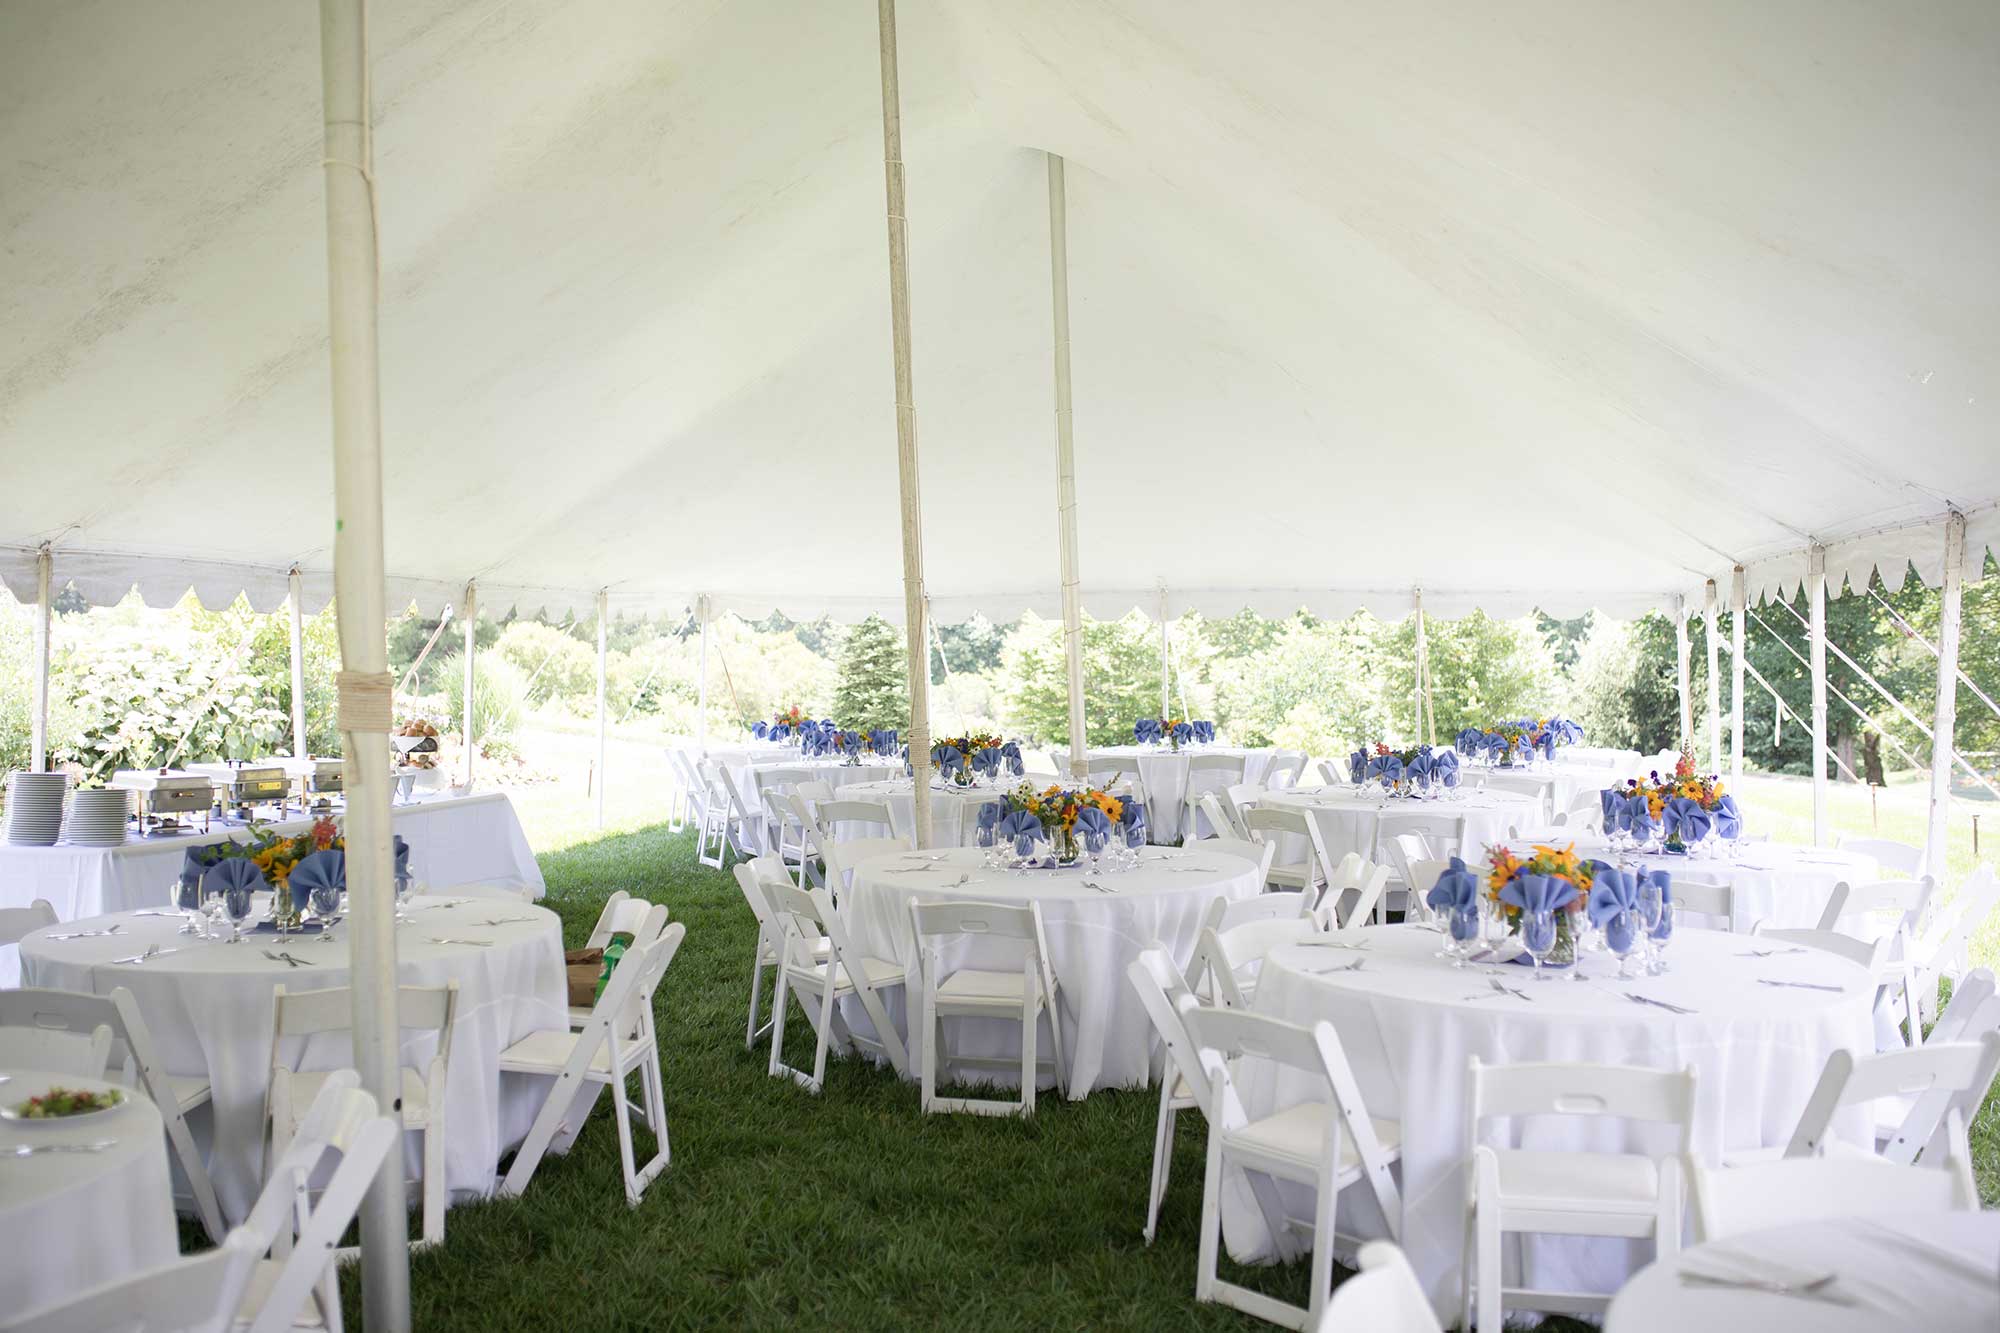 White Tablecloths and Colorful Centerpieces Outside Under a Large White Tent with folding chairs